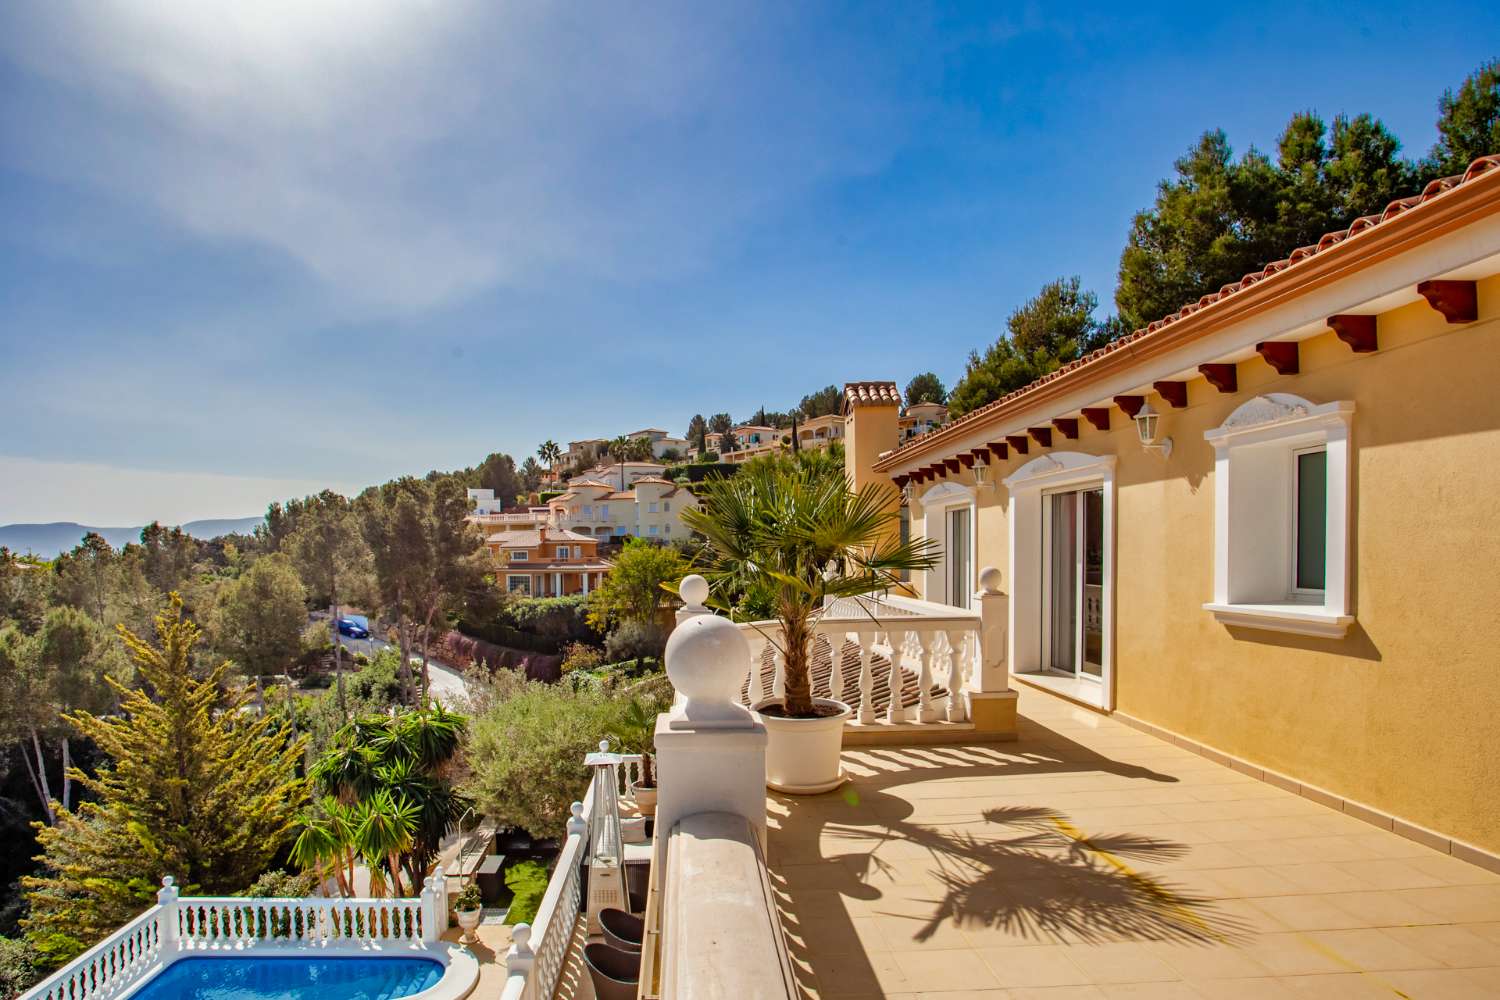 High standing, luxury villa in one of the most prestigious areas of the Costa Blanca.